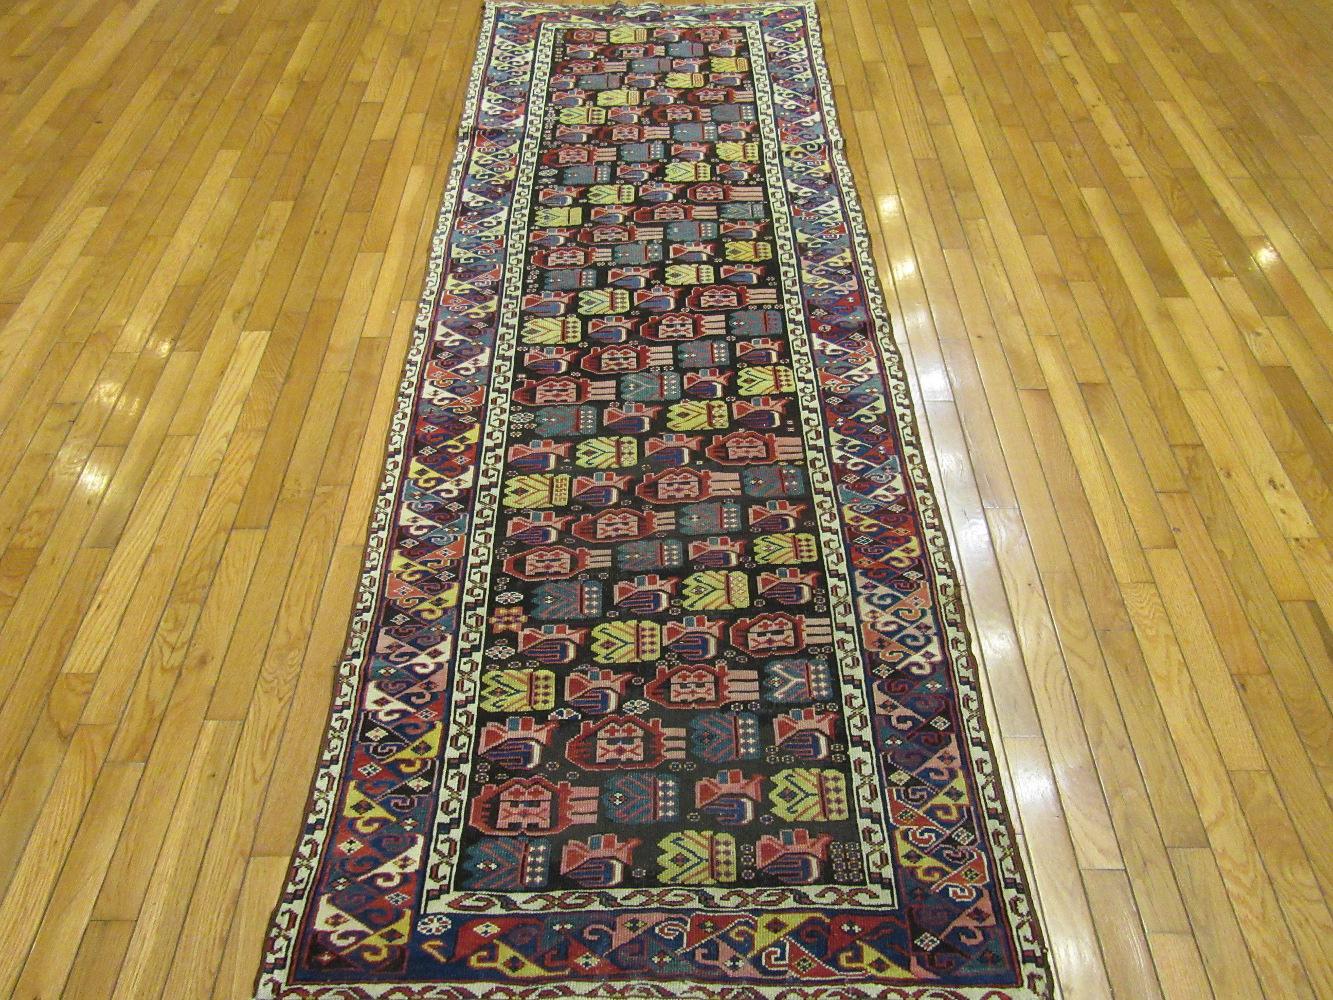 This is an antique hand knotted Caucasian Shirvan rug. It is made with fine wool colored with all natural dyes in a fine tight weave. The rug has a very unique all over geometric design in rich colors. It measures 3' x 8' 6'' and in great condition.